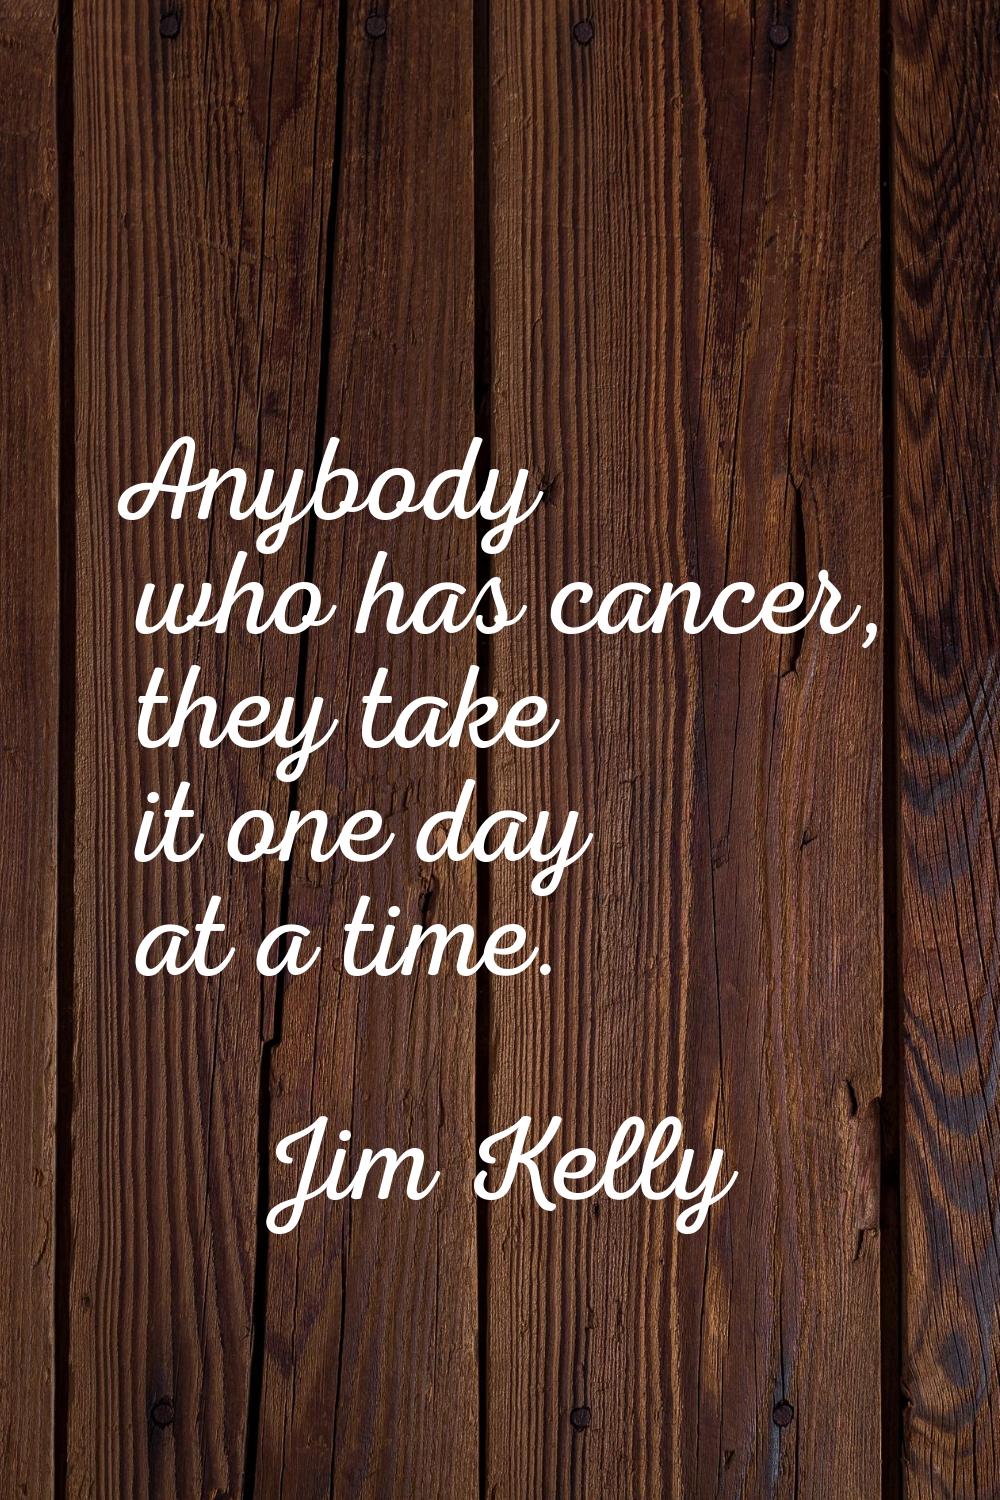 Anybody who has cancer, they take it one day at a time.